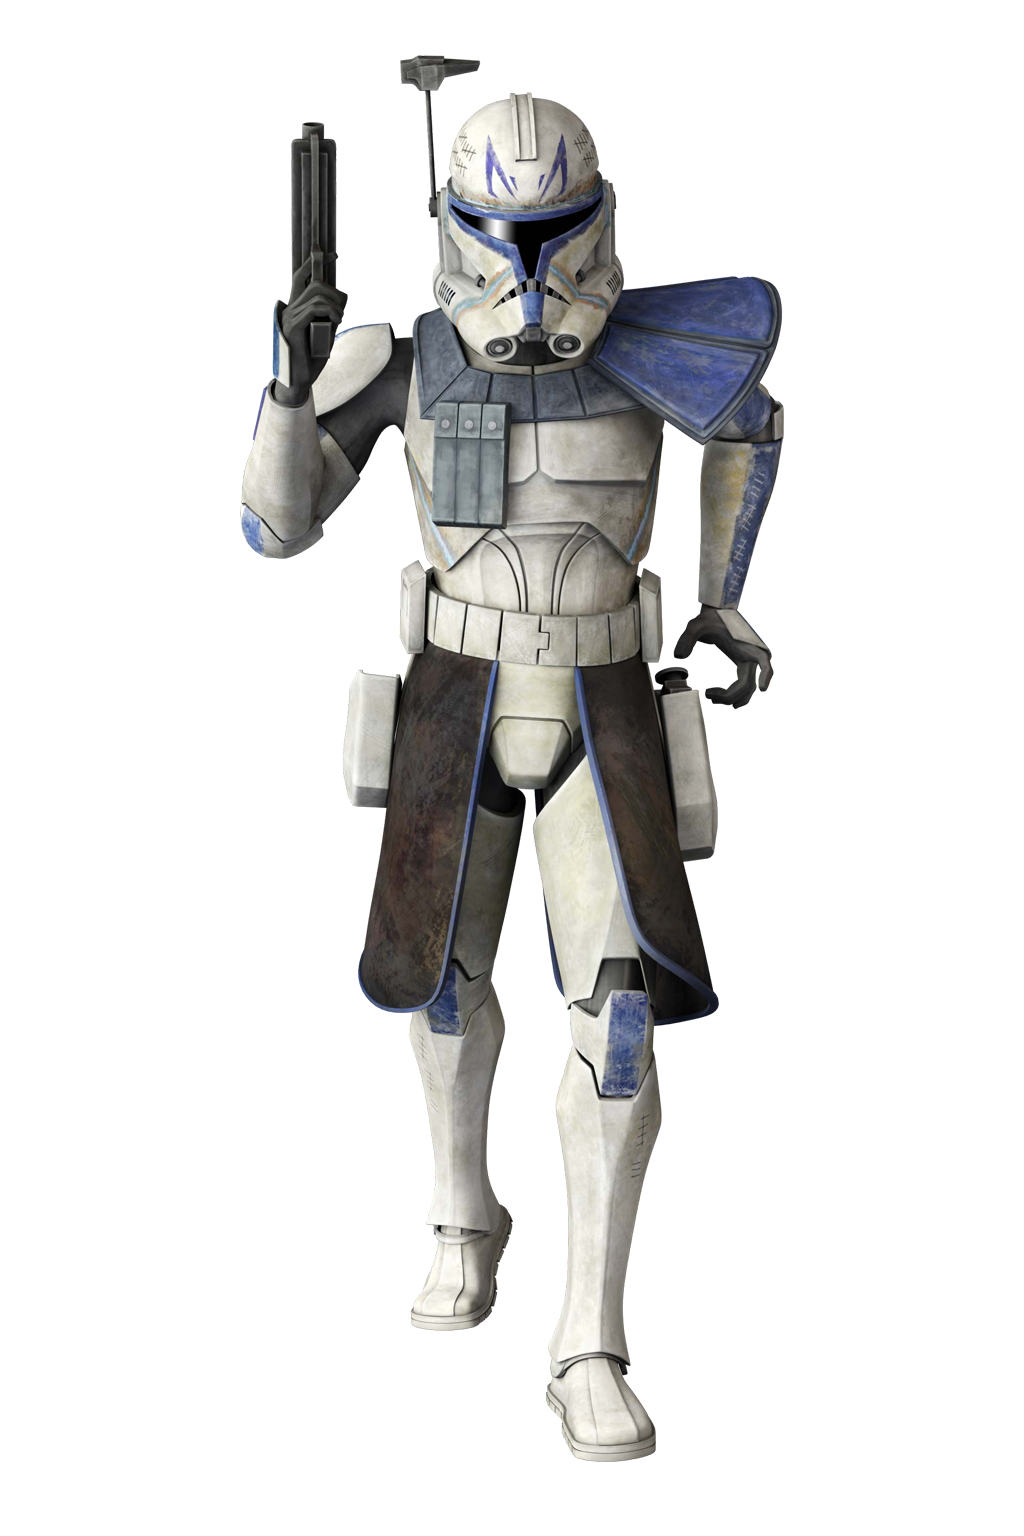 CT-7567 Rex (as of the Clone Wars)